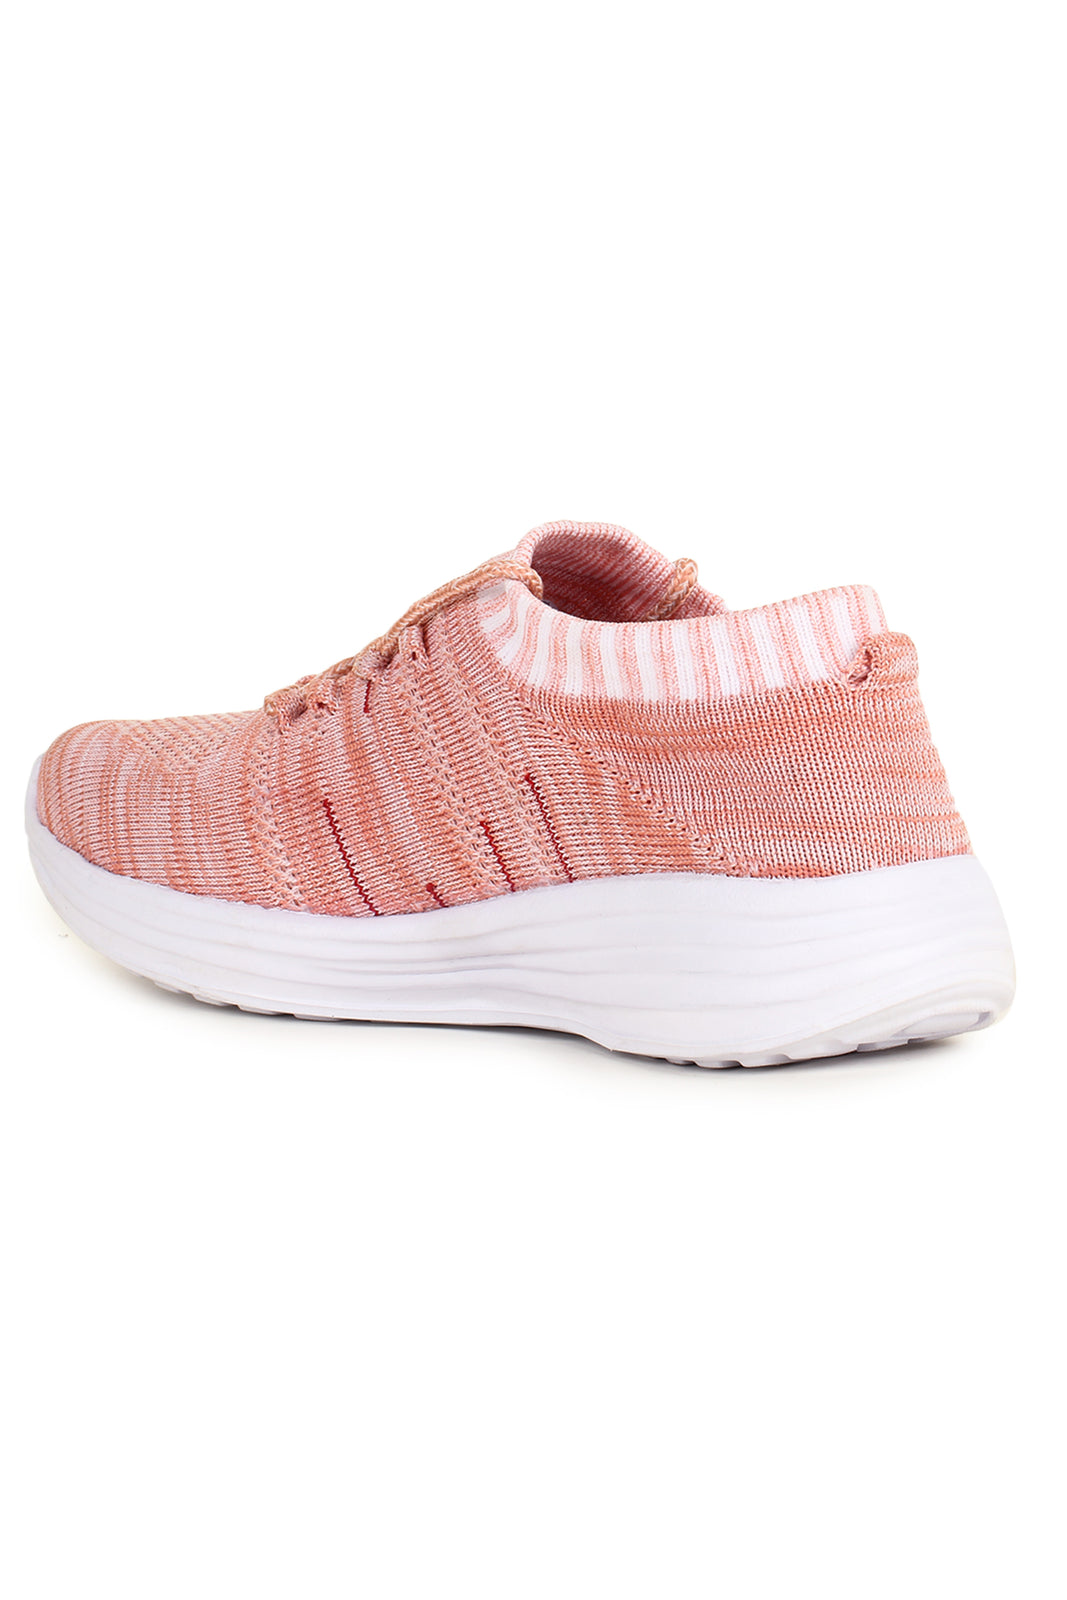 Pink Solid Mesh Lace Up Running Sport Shoes For Women